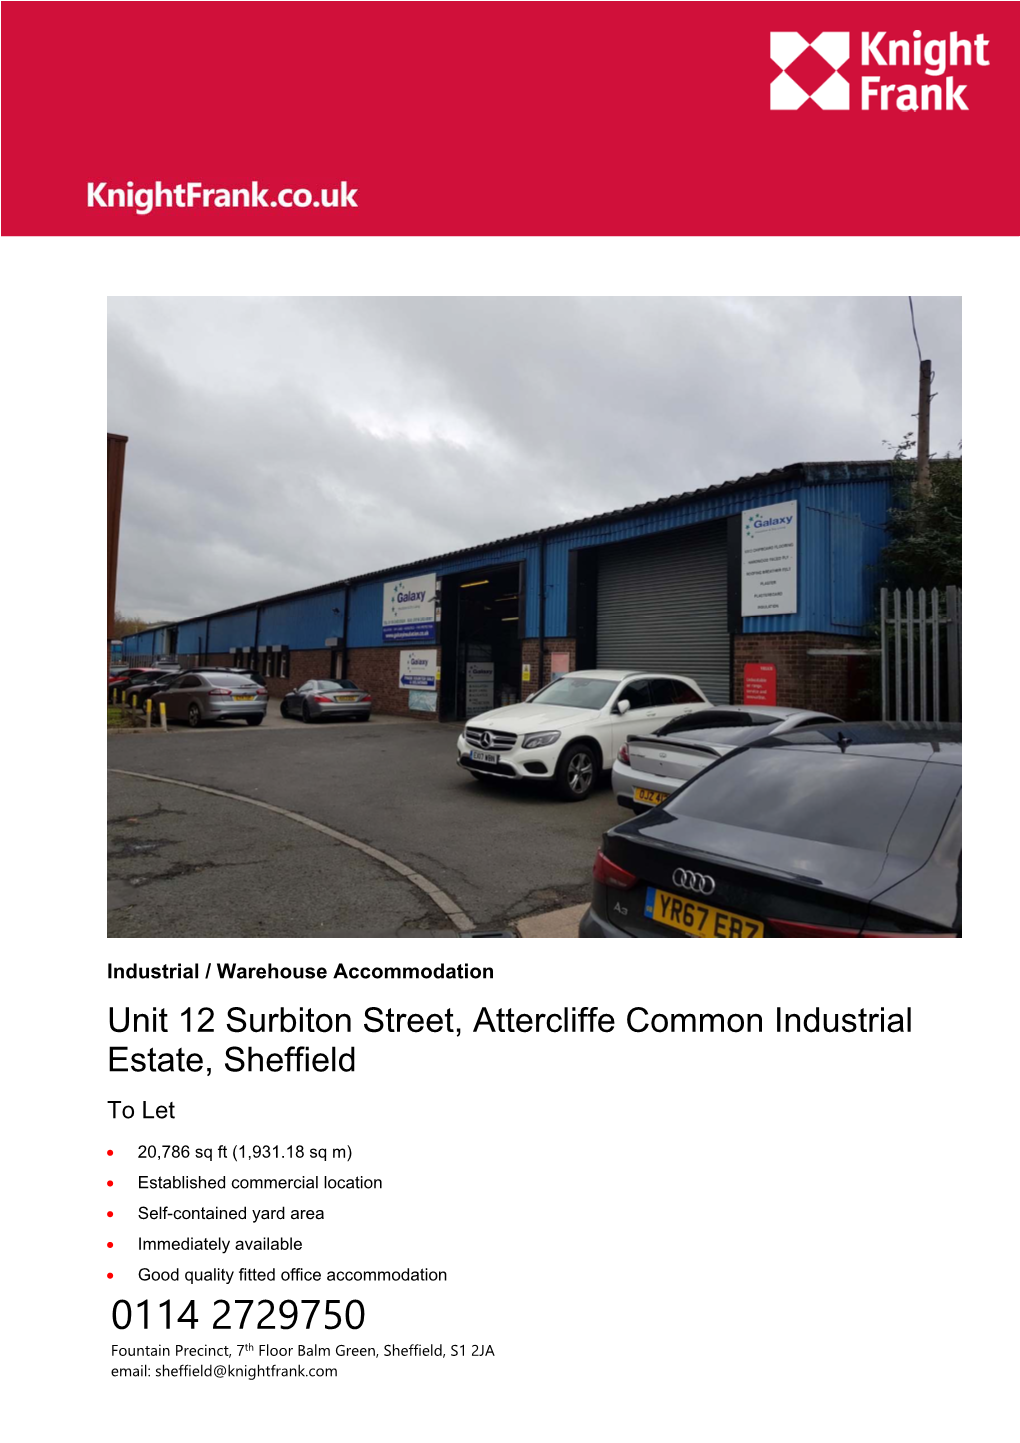 Unit 12 Surbiton Street, Attercliffe Common Industrial Estate, Sheffield to Let